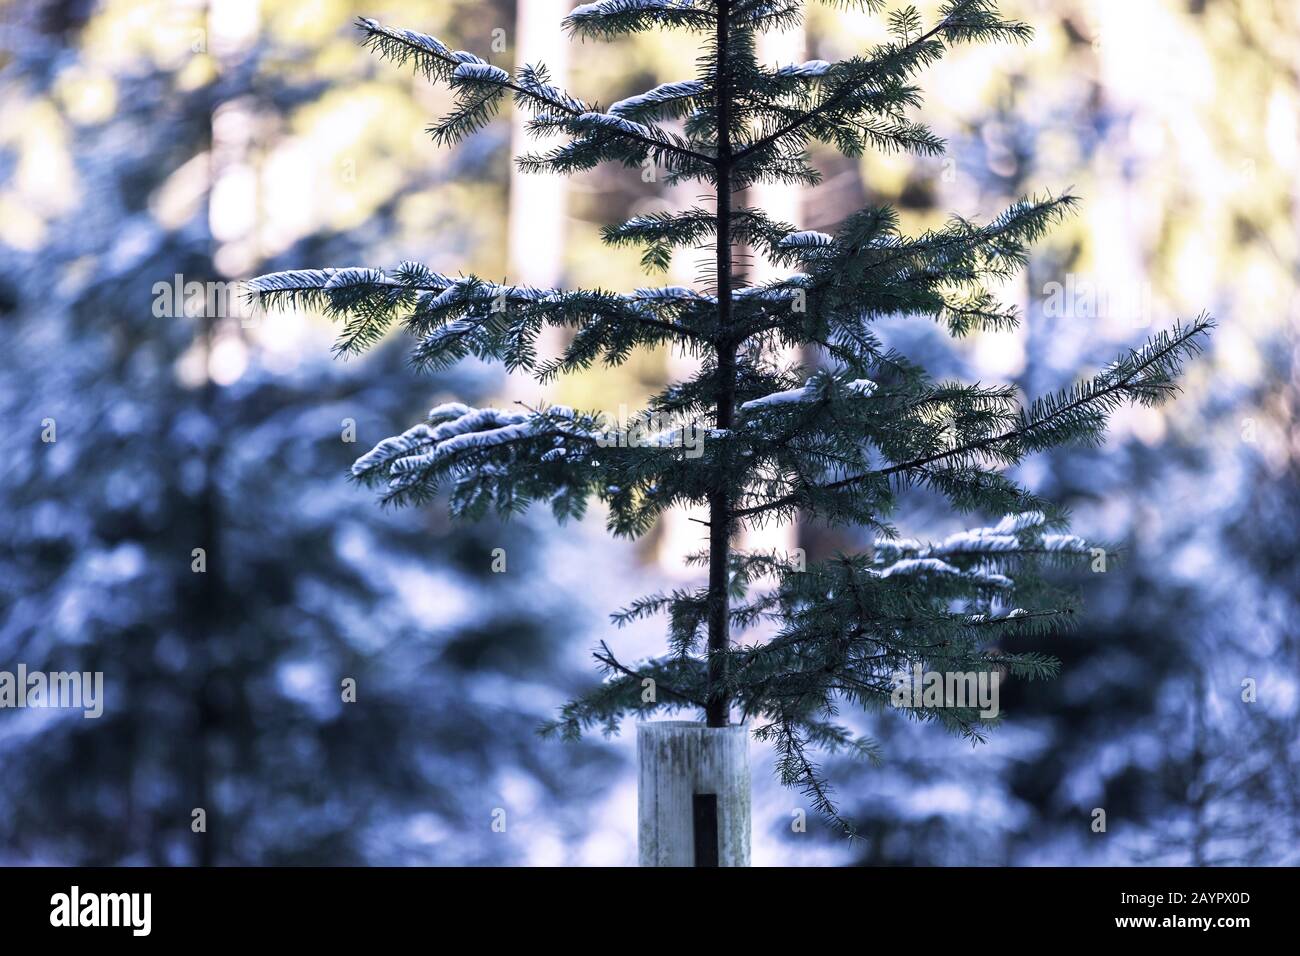 a new tree with protetion in the winter Stock Photo